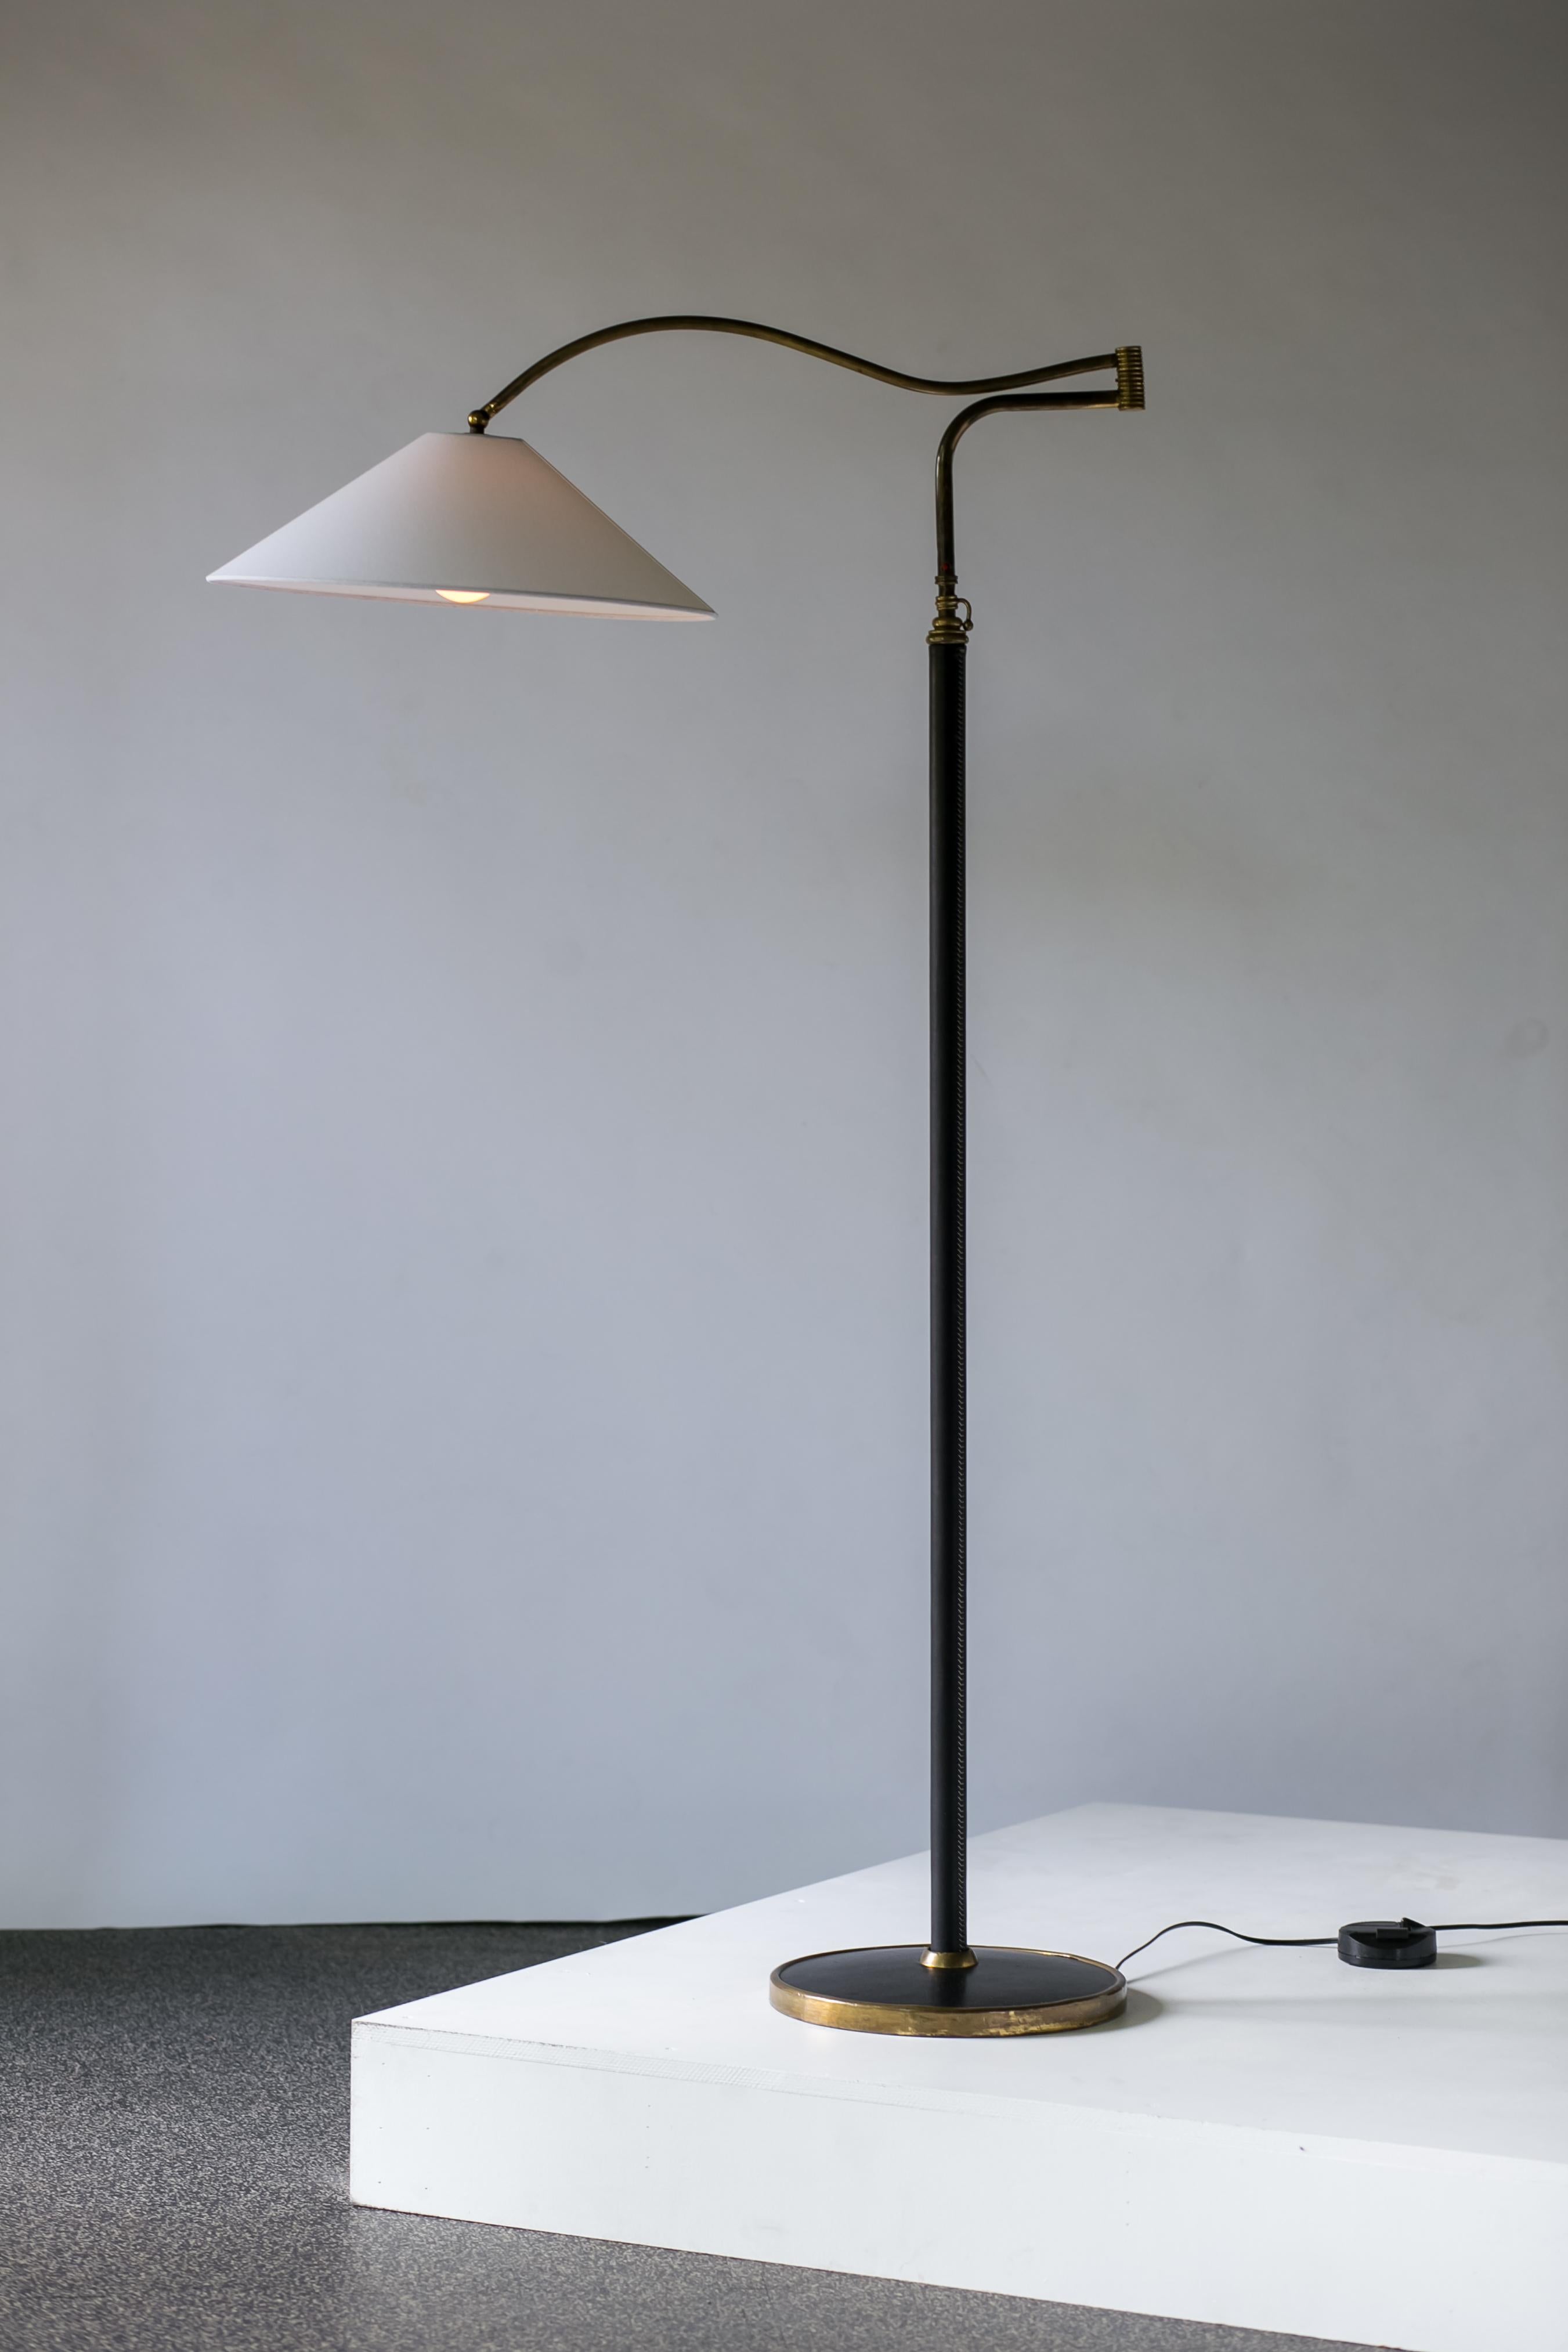 A Mid-Century Modern Italian floor lamp in brass, black leather and white linen

A rare and beautiful floor lamp by Arredoluce, a design often credited to Angelo Lelii (Lelli) who founded Arredoluce in 1947 in Monza, Italy.

Floor lamp